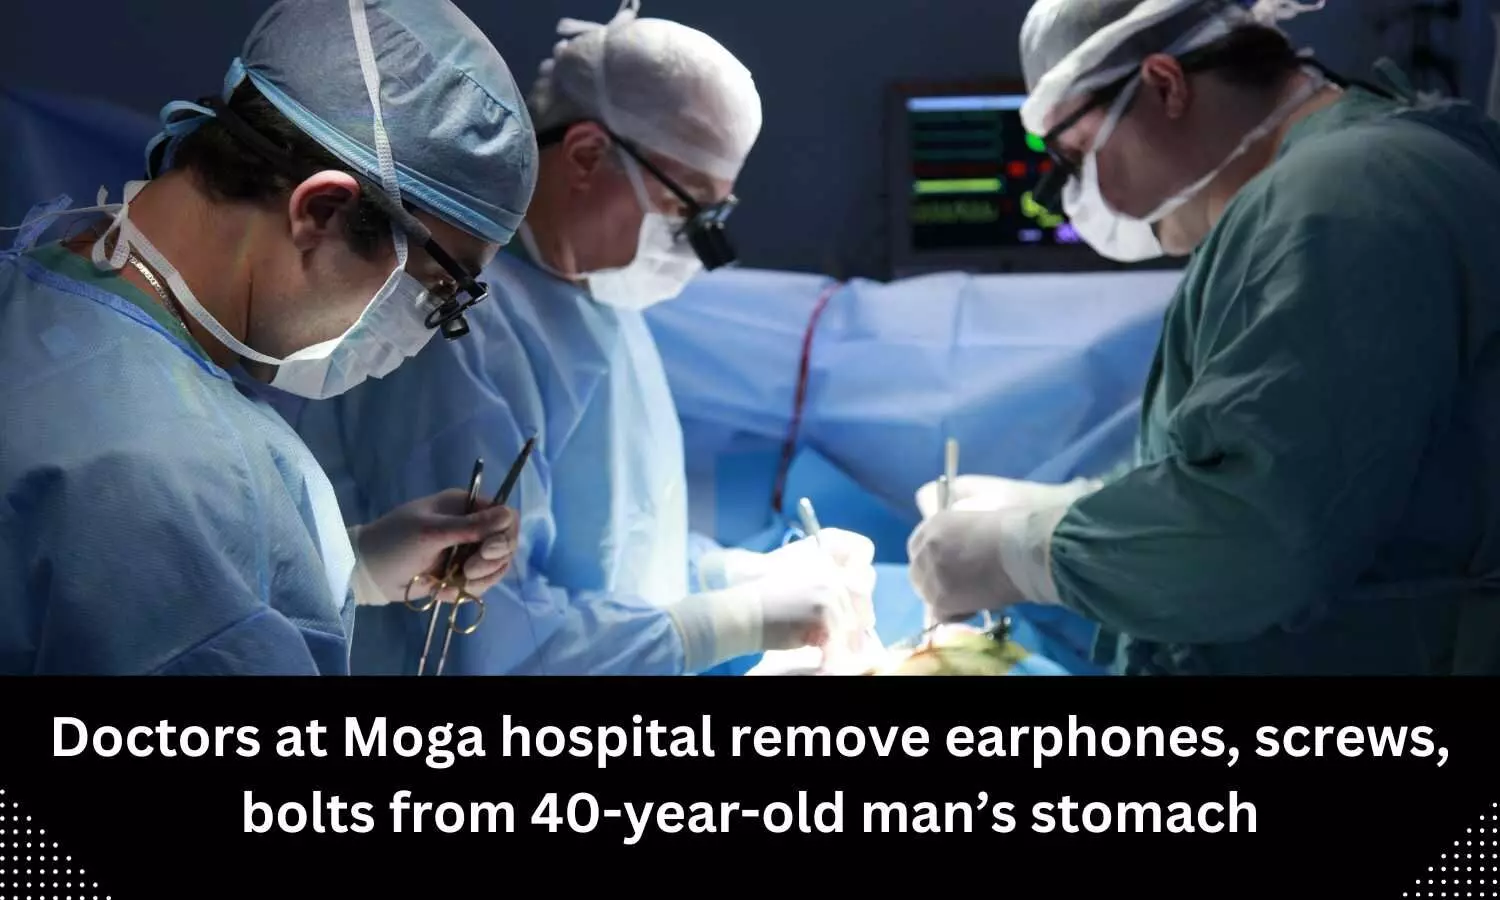 Doctors remove earphones, screws, bolts from 40-year-old mans stomach